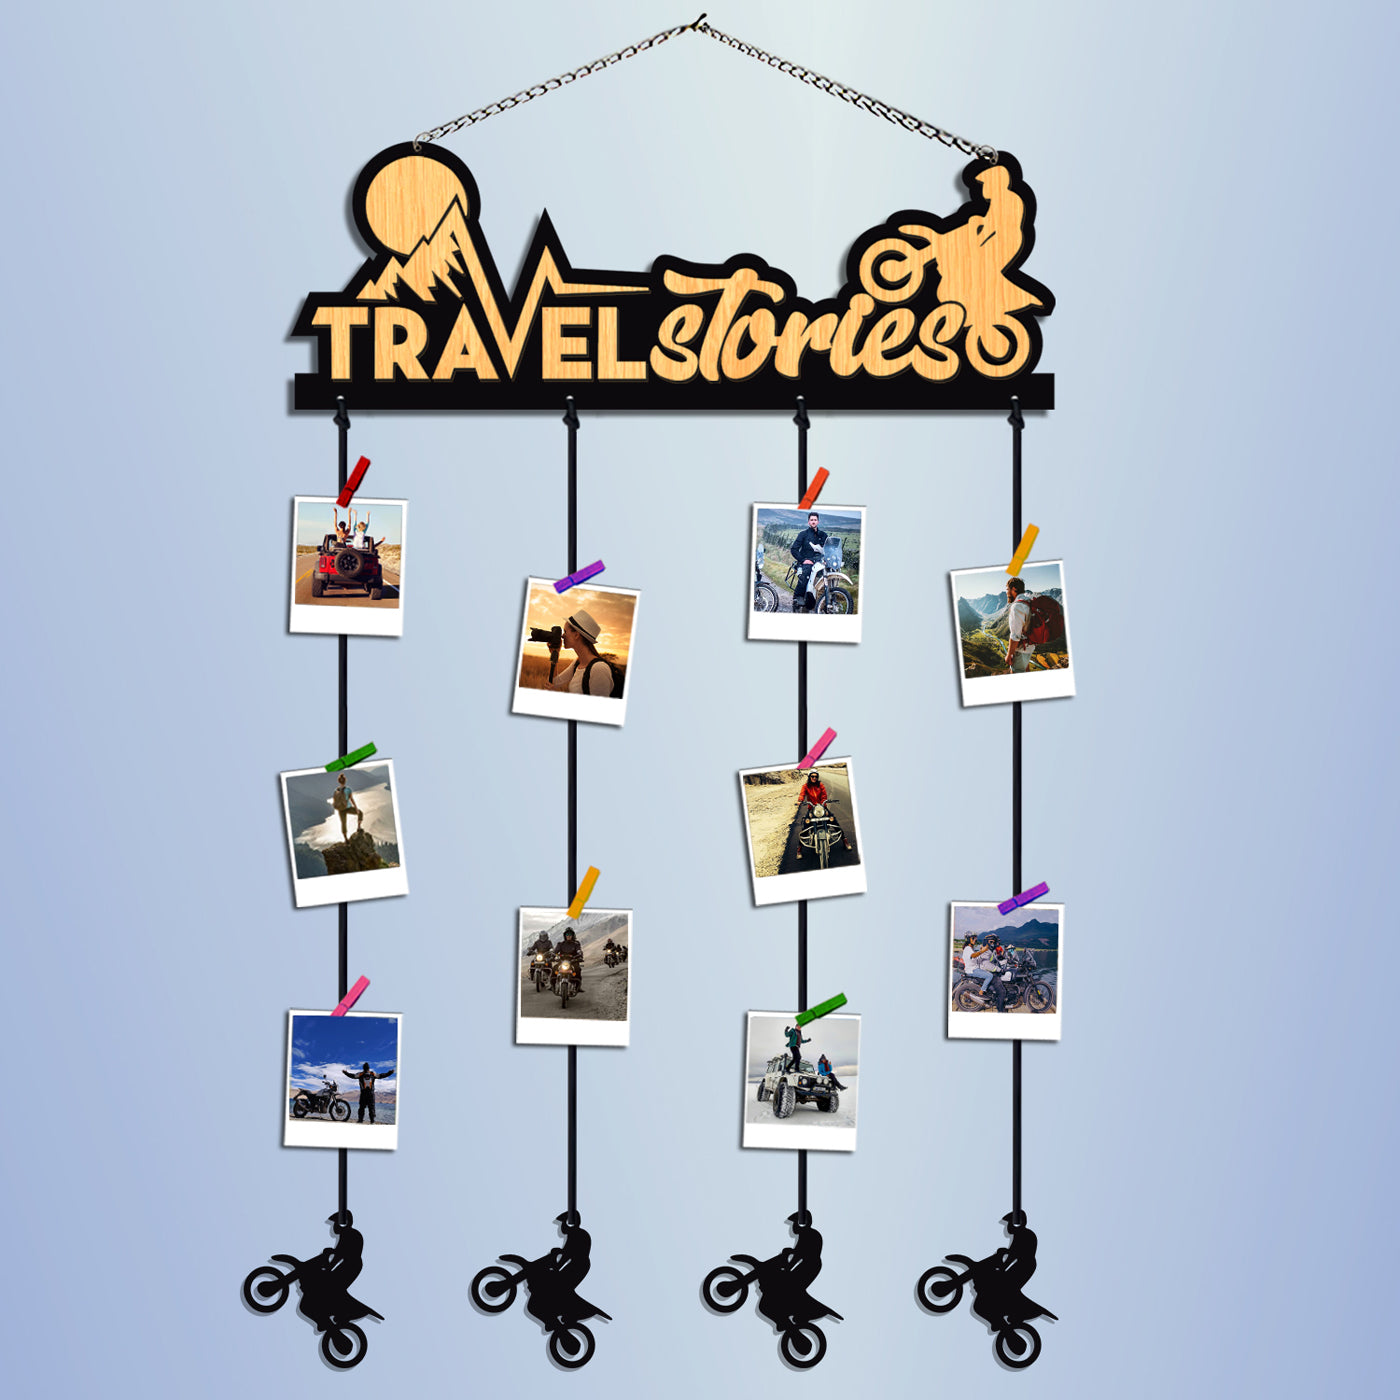 Travel stories photo frames to gift to traveller friends | wall hanging | photo frame | gifts